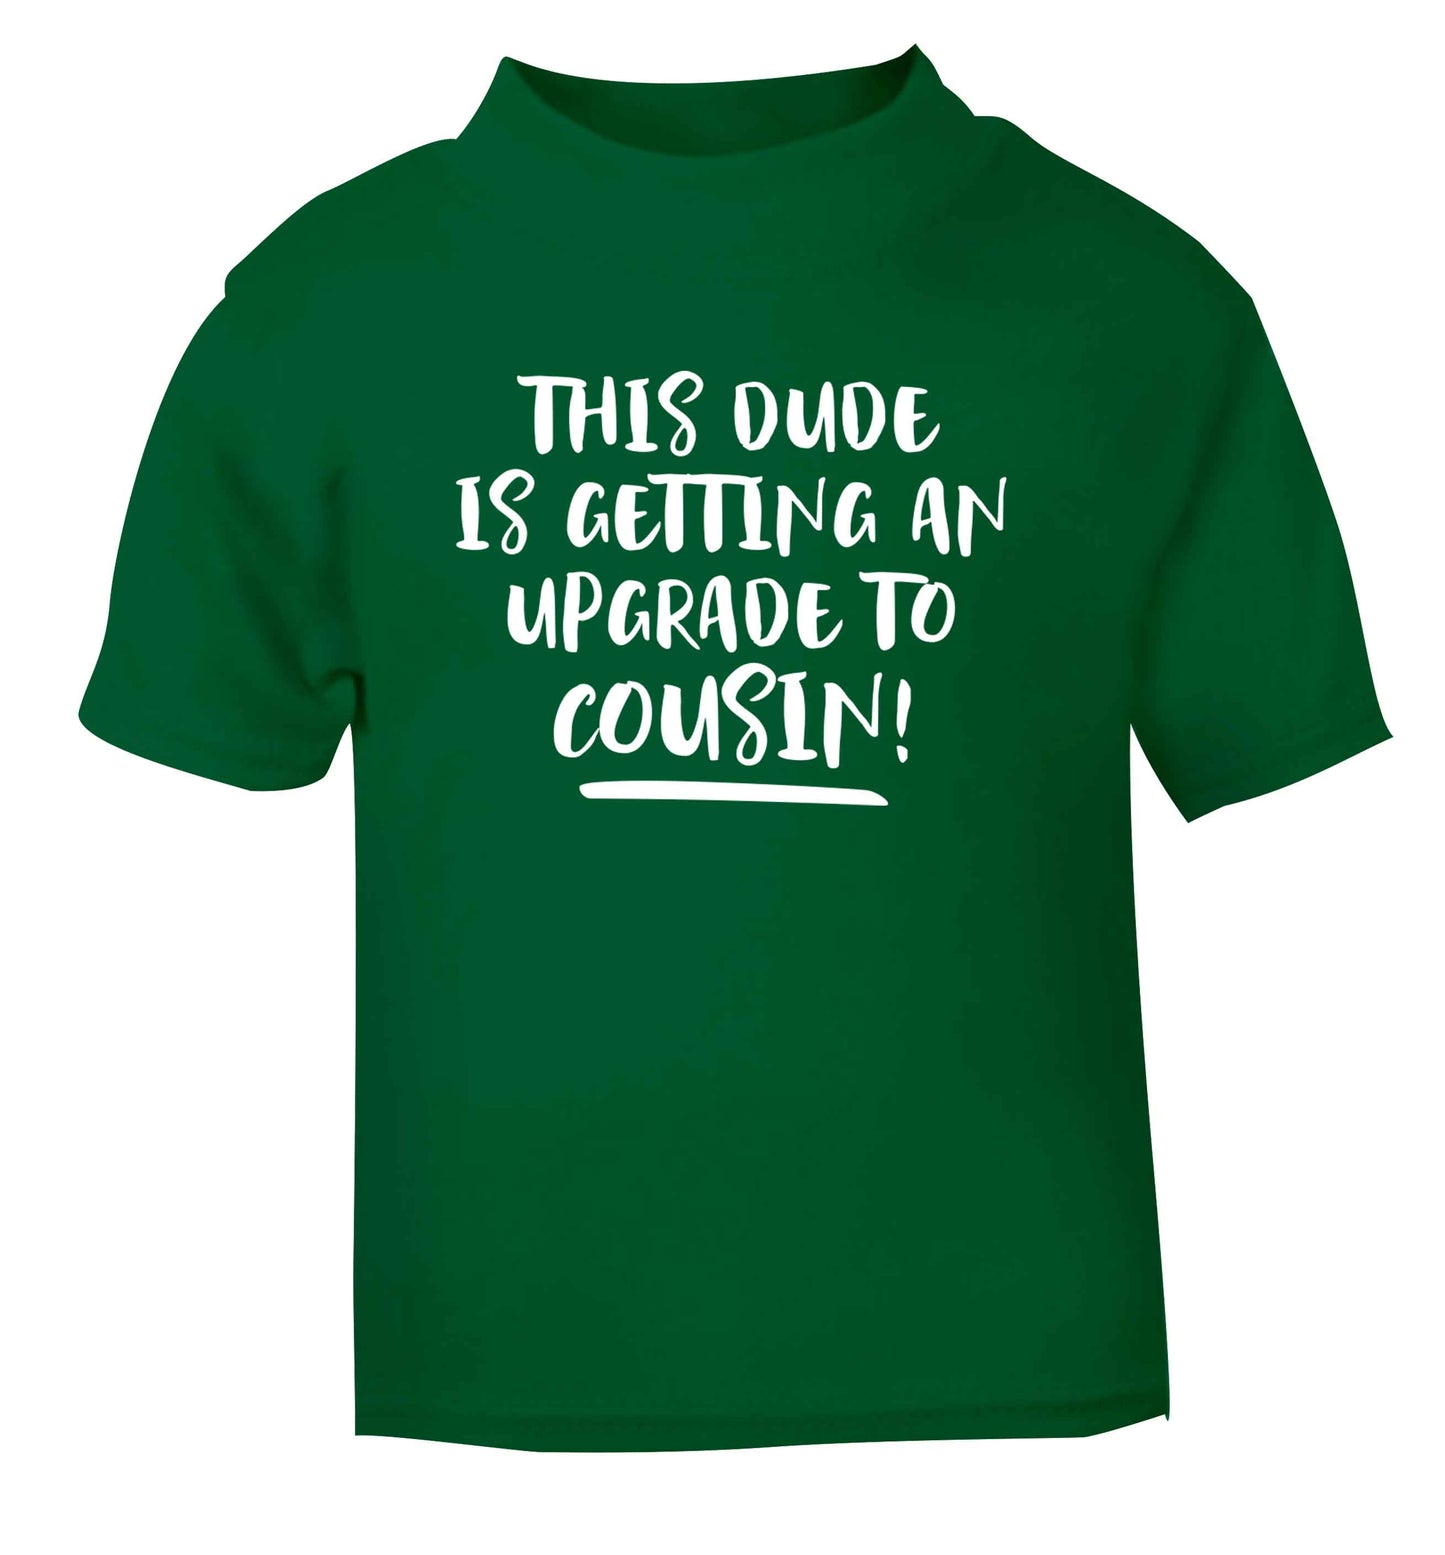 This dude is getting an upgrade to cousin! green Baby Toddler Tshirt 2 Years